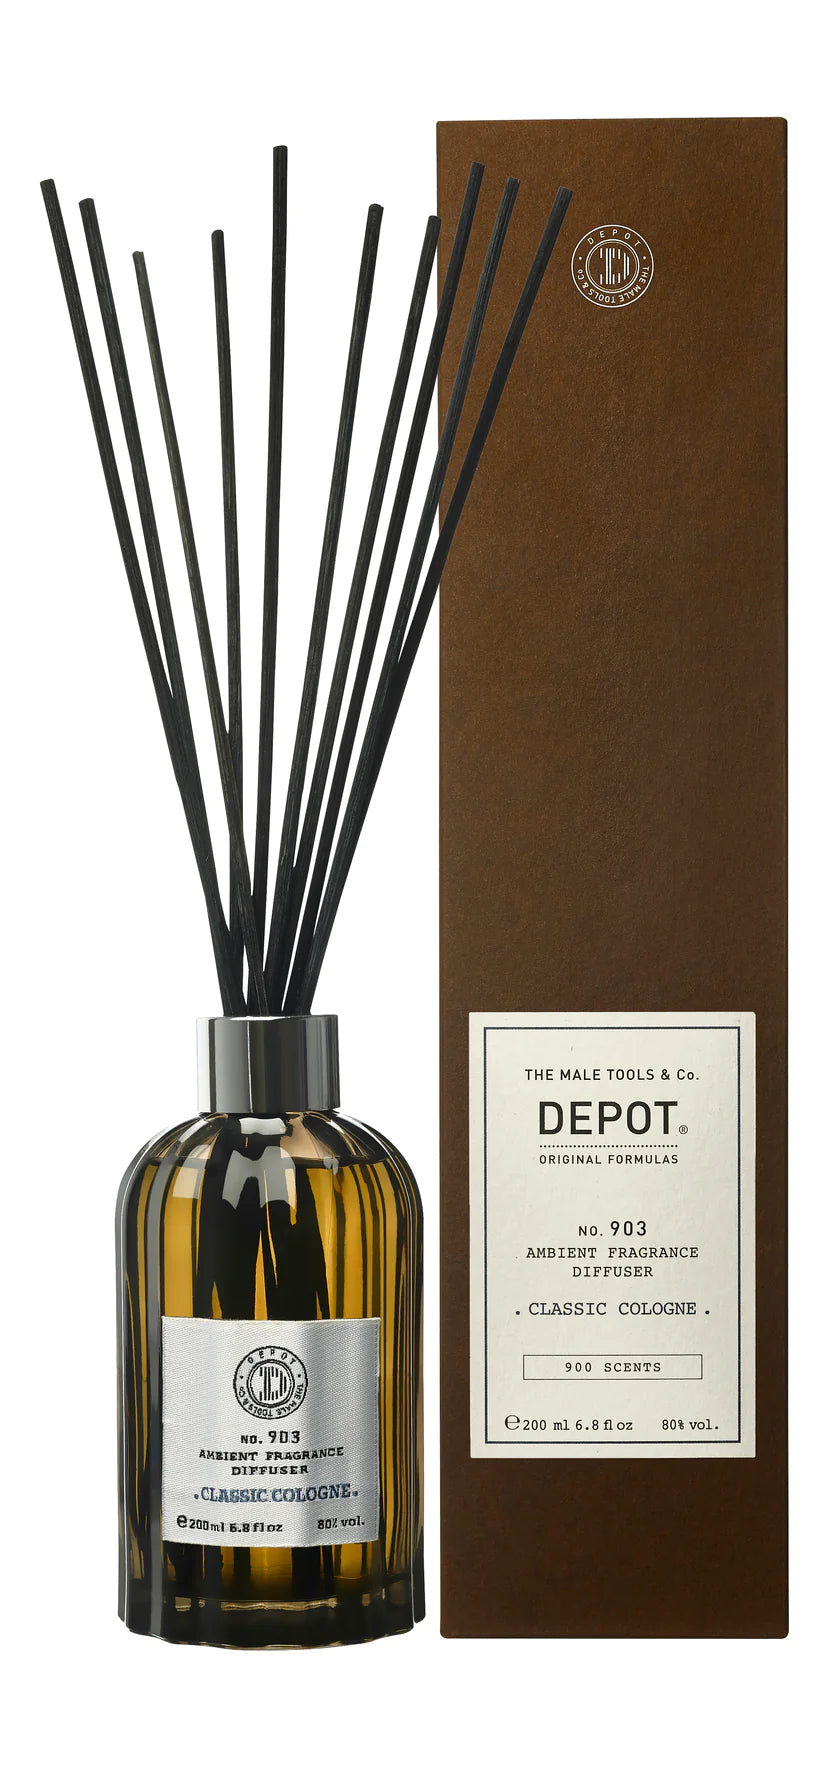 Depot NO. 903 AMBIENT FRAGRANCE DIFFUSER classic cologne 200ML